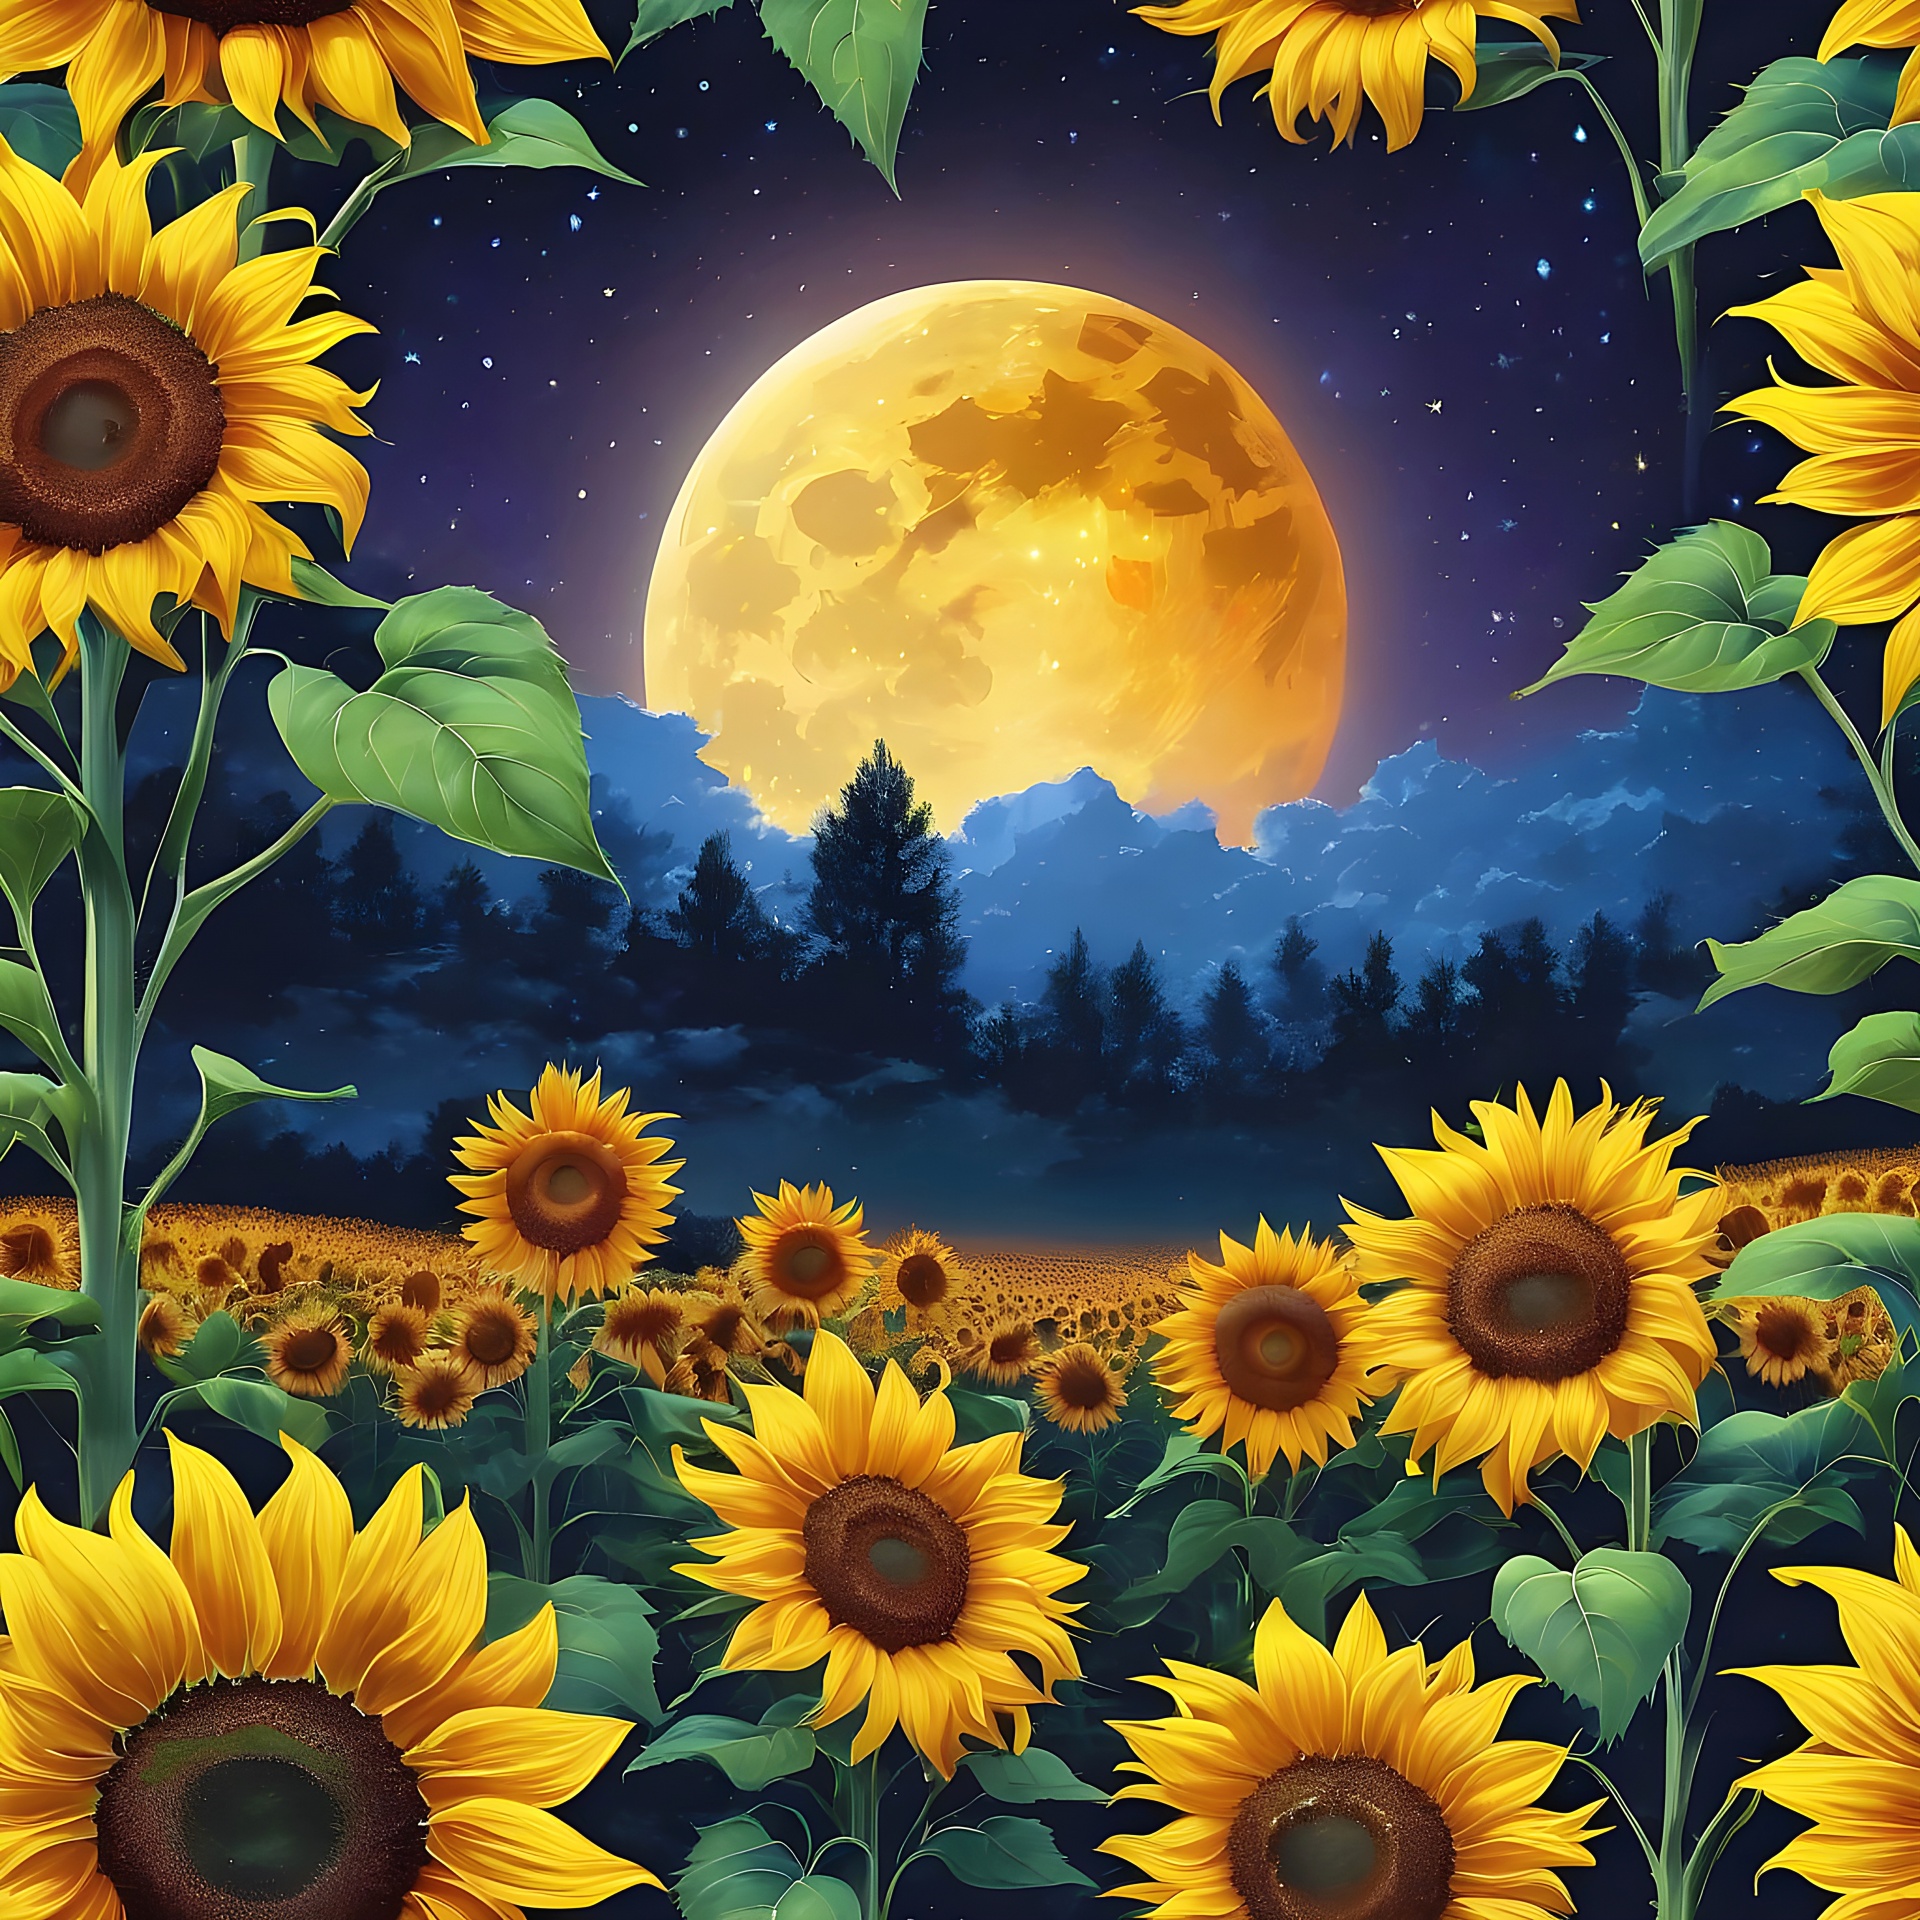 Sunflowers Full Moon Night Free Stock Photo - Public Domain Pictures